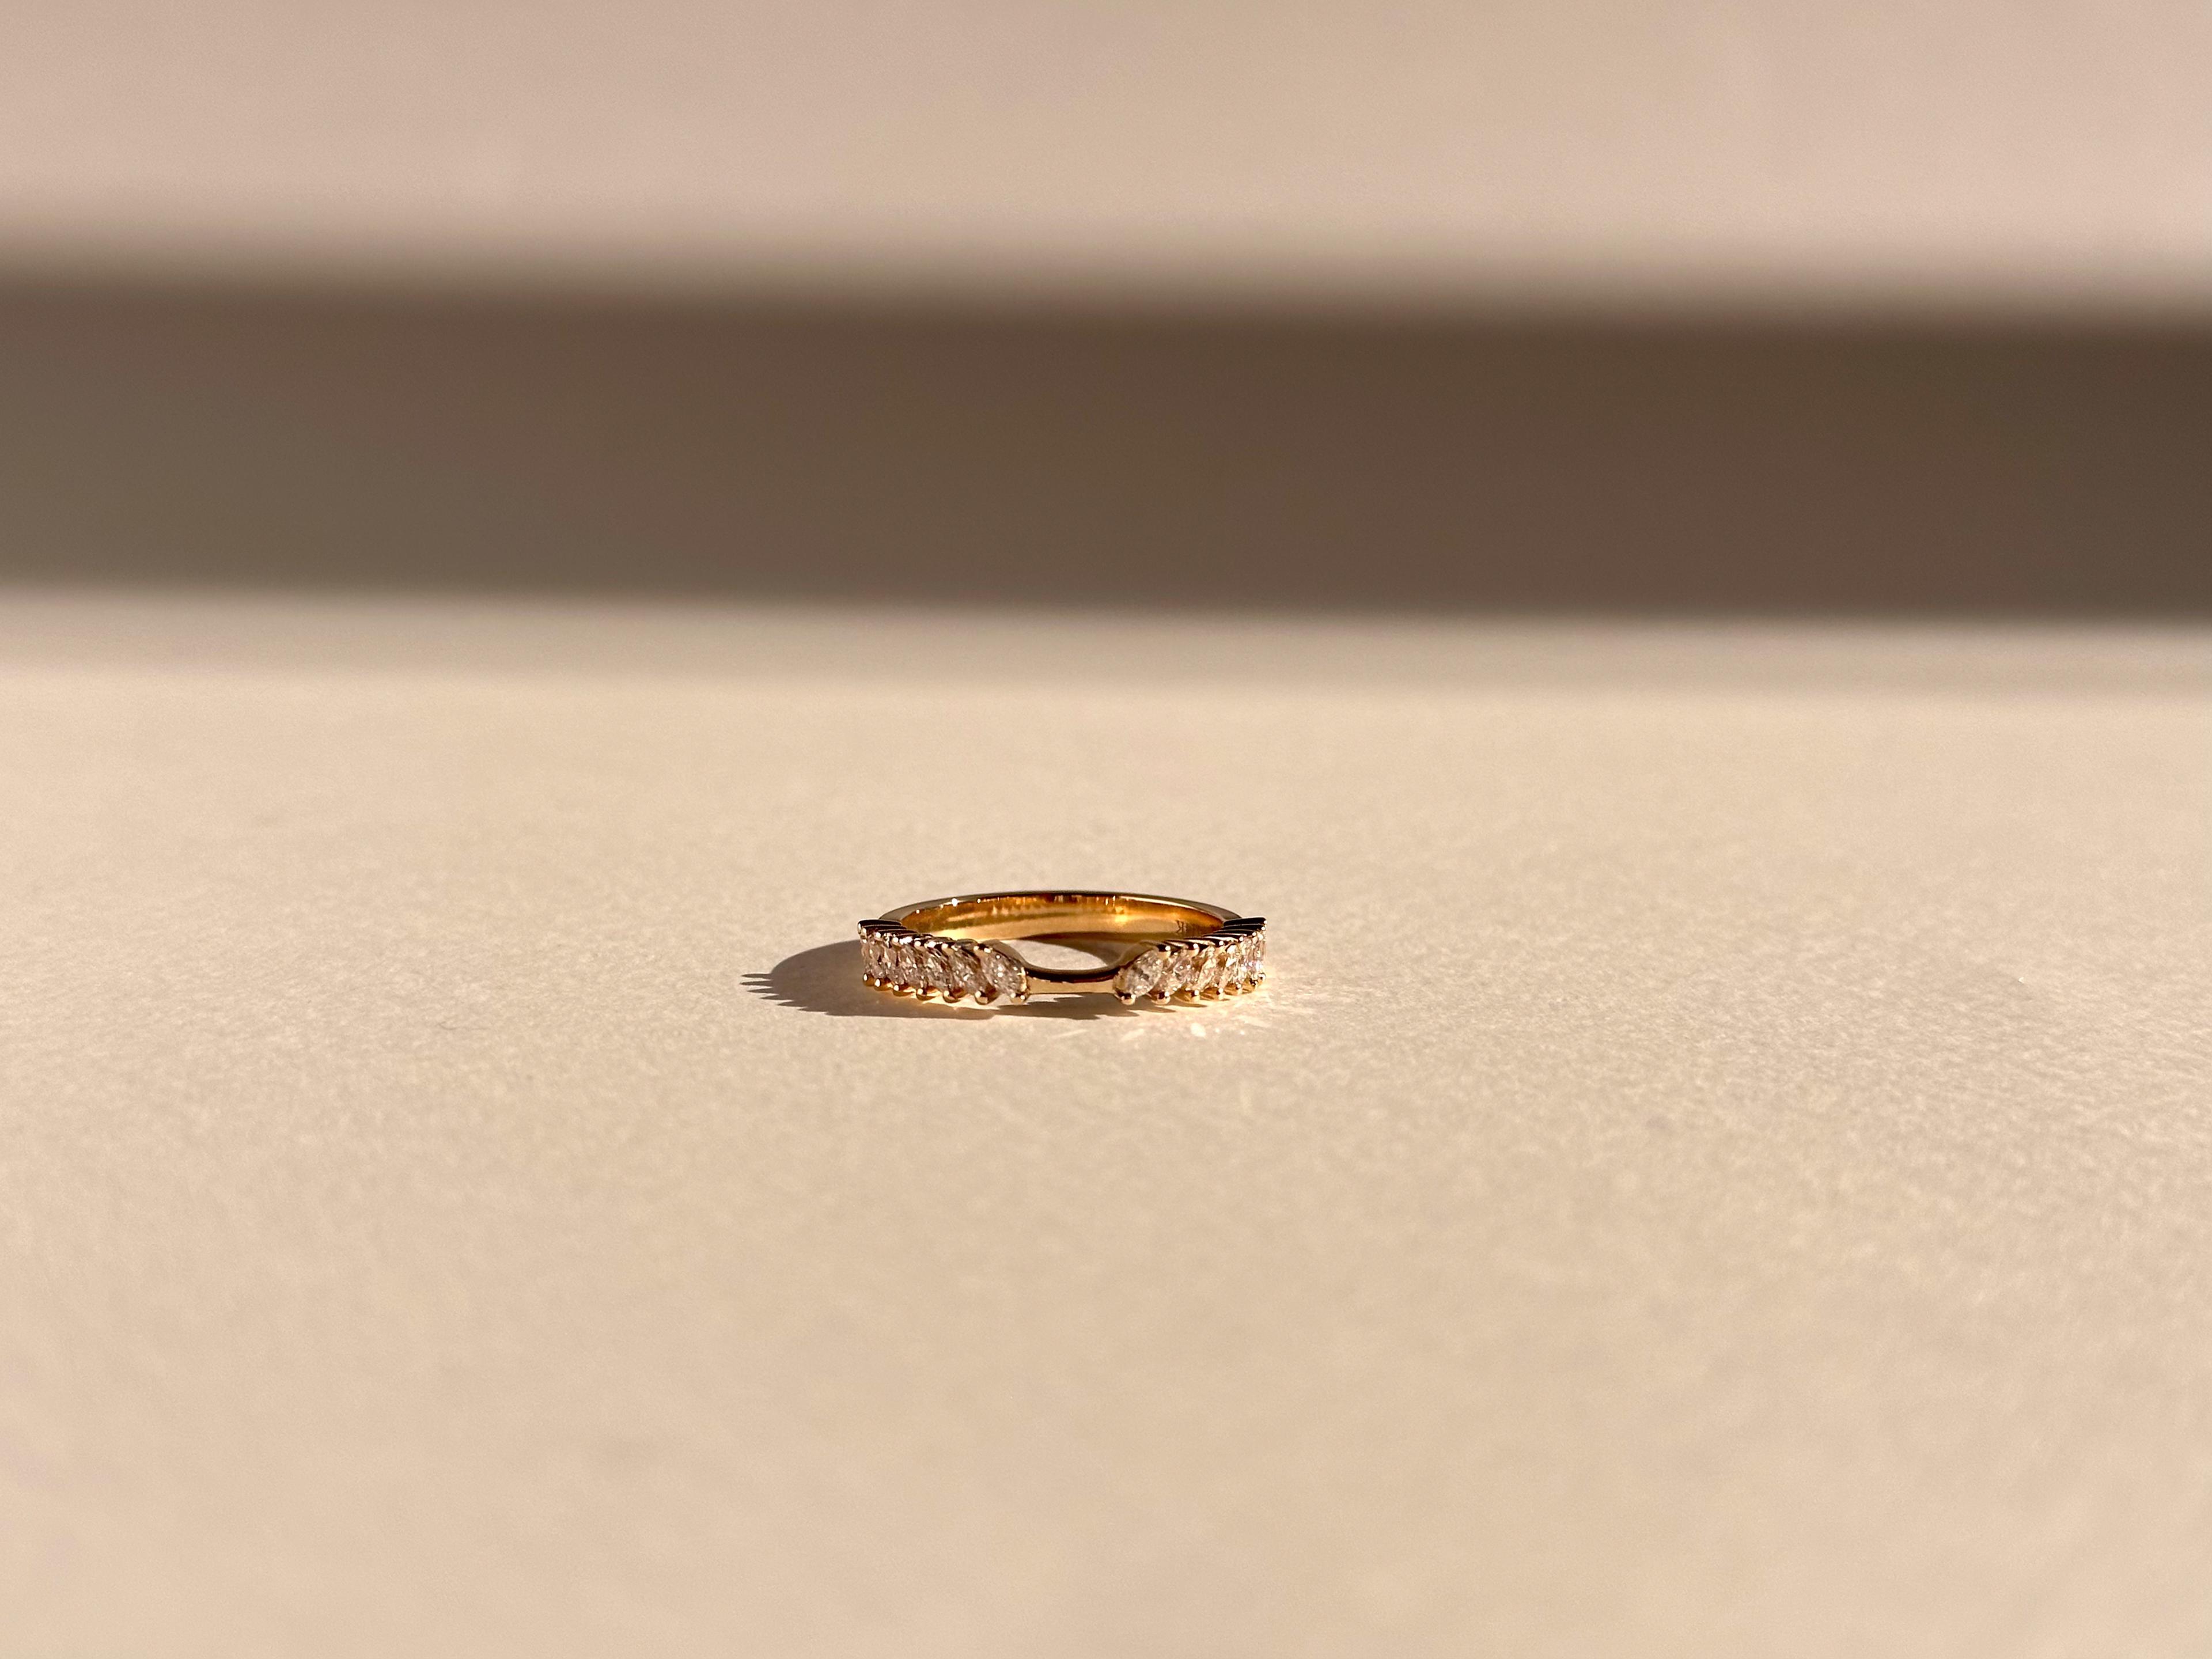 Rose gold wedding ring with marquise diamond